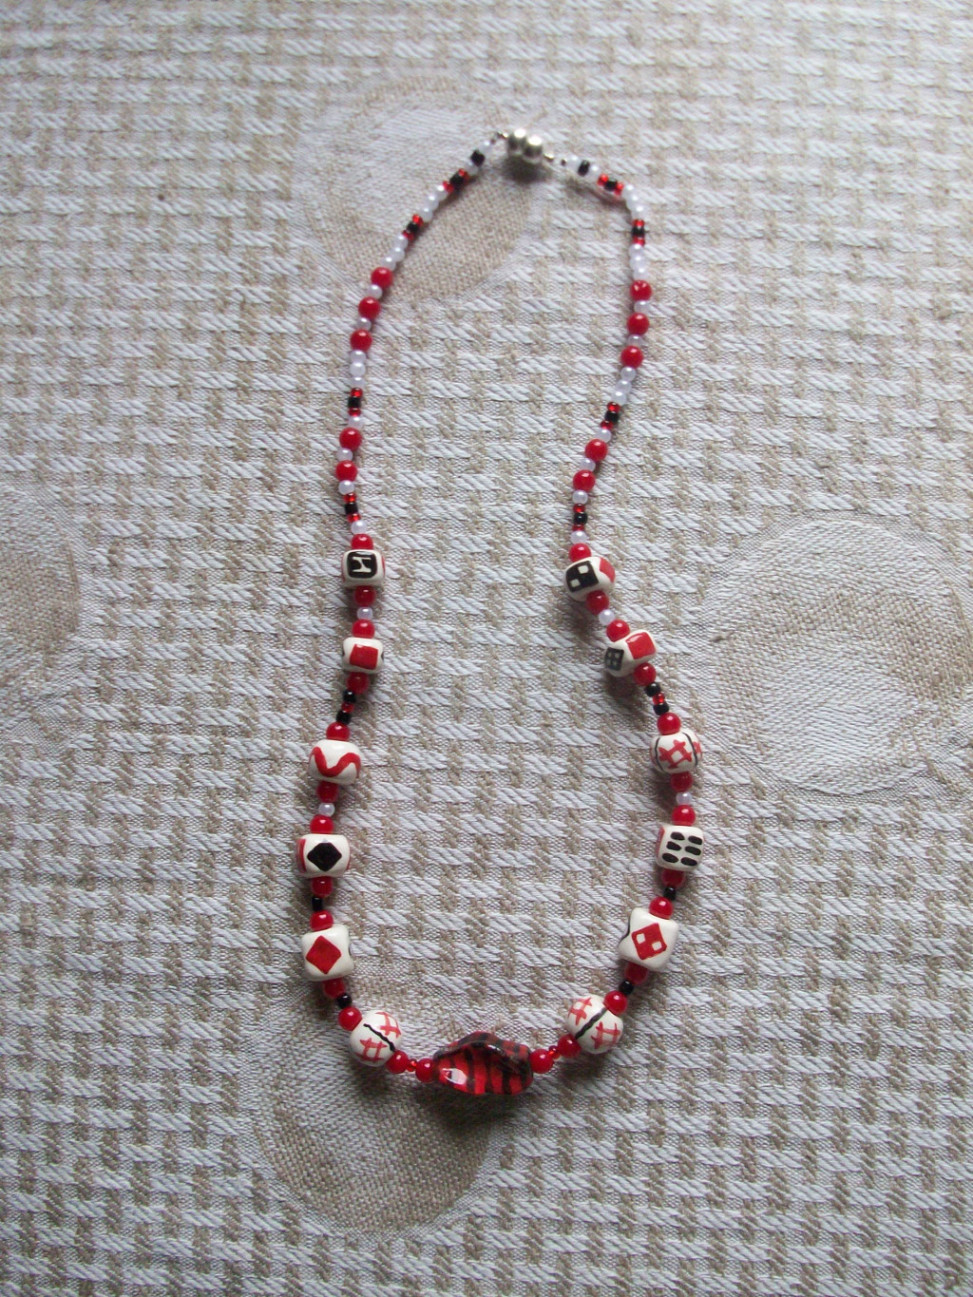 Jewelry: Necklace red and black